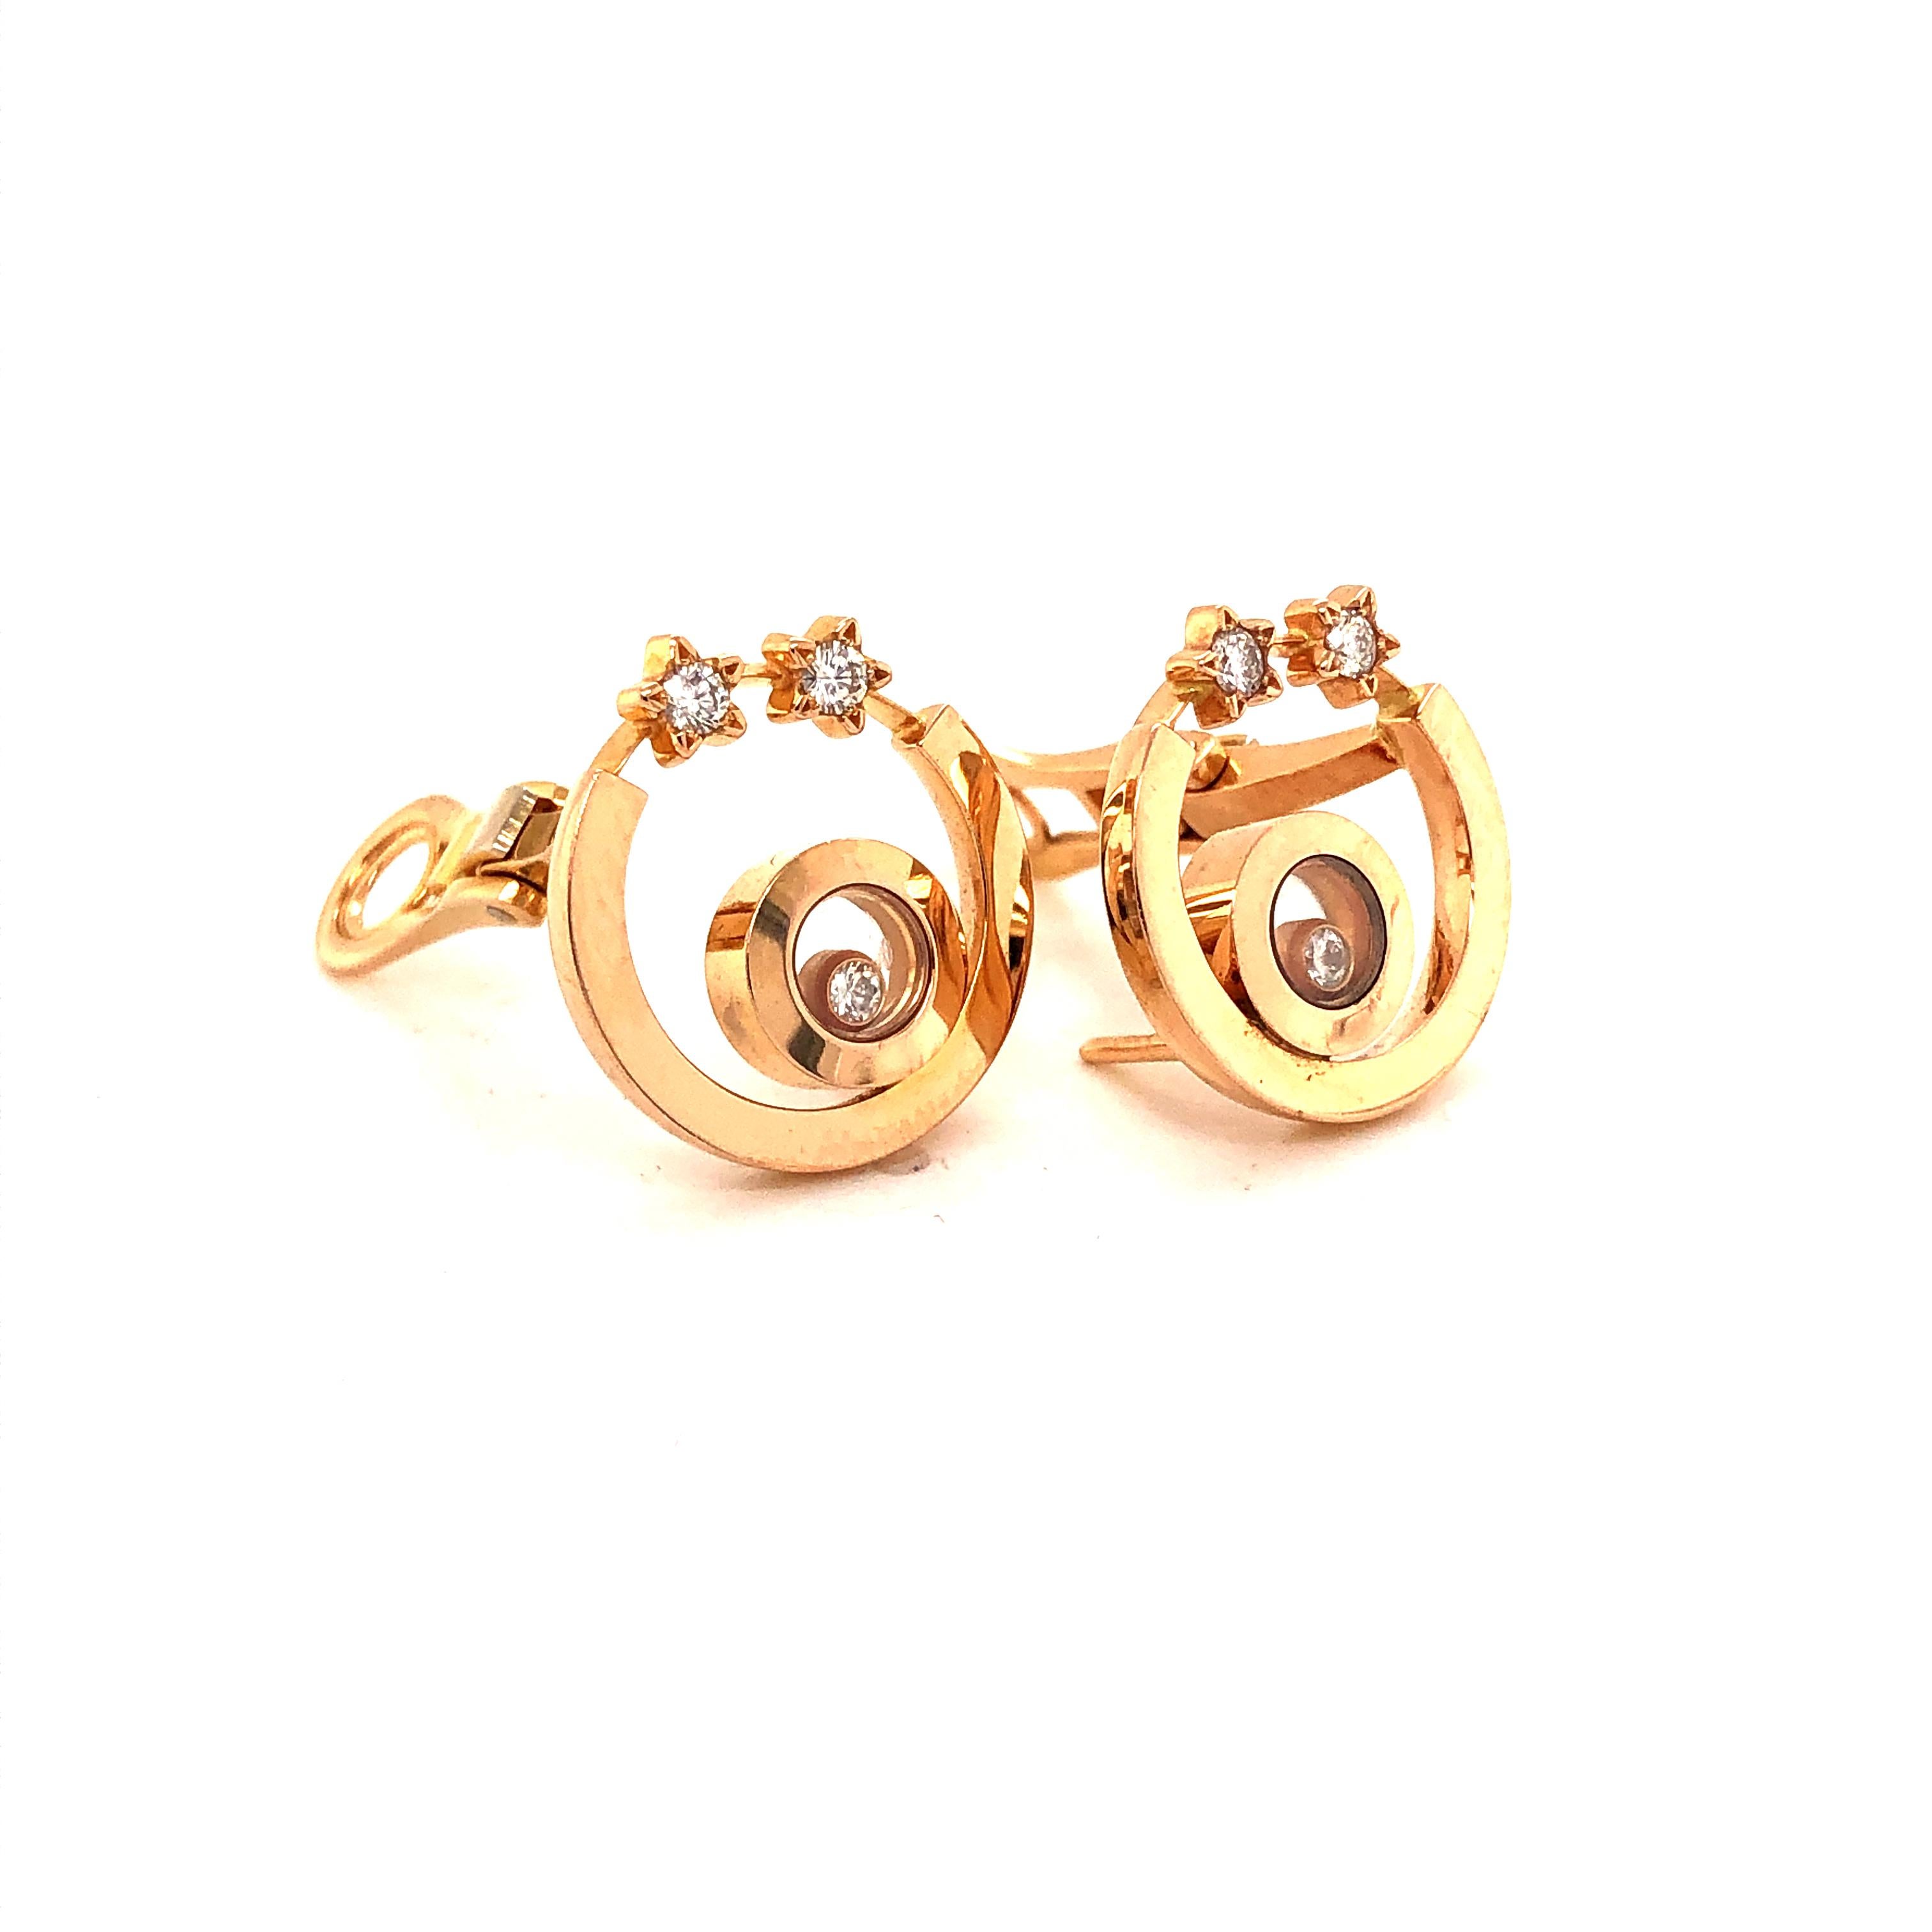 This is an 18k Italian pink gold pair of earrings from Chopard’s ‘Happy Diamonds’ collection. Circular design is seen with diamond encased stars. The center shows Chopard's glass encased circle with 1 floating diamond. These diamonds are all of